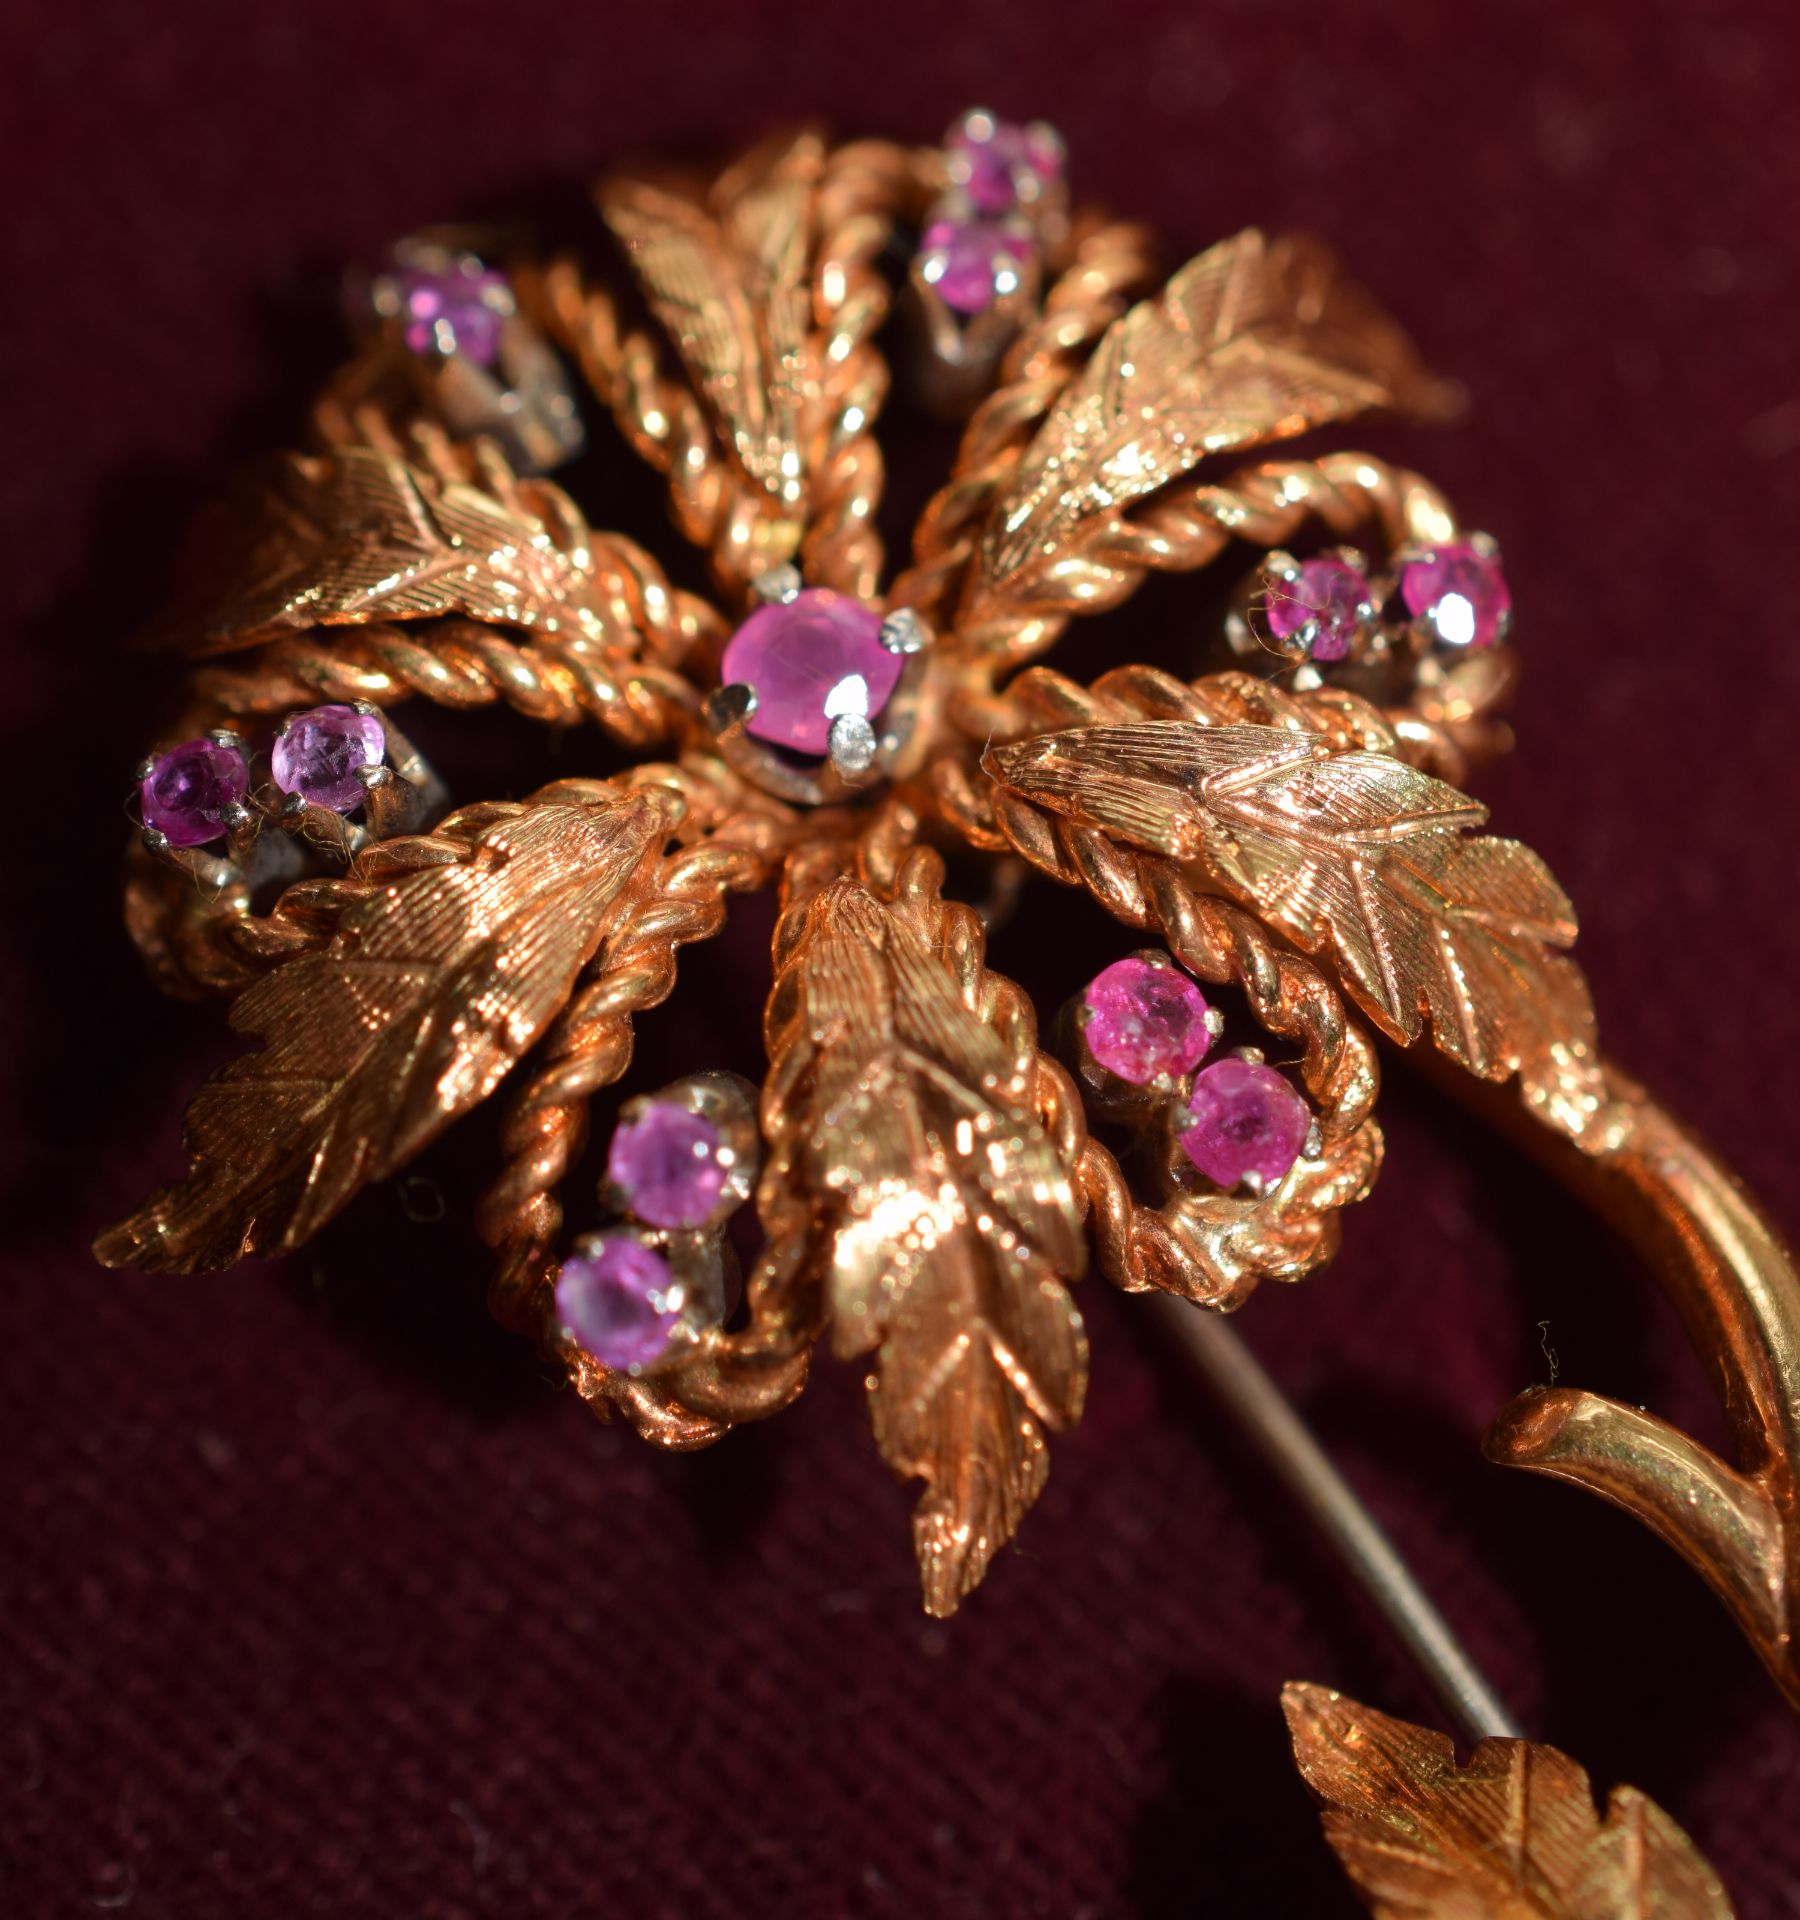 18ct Yellow Gold Lady's Flower Brooch Set With 12 Small Rubies & 1 Central Larger Ruby 6.8grms - Image 2 of 8